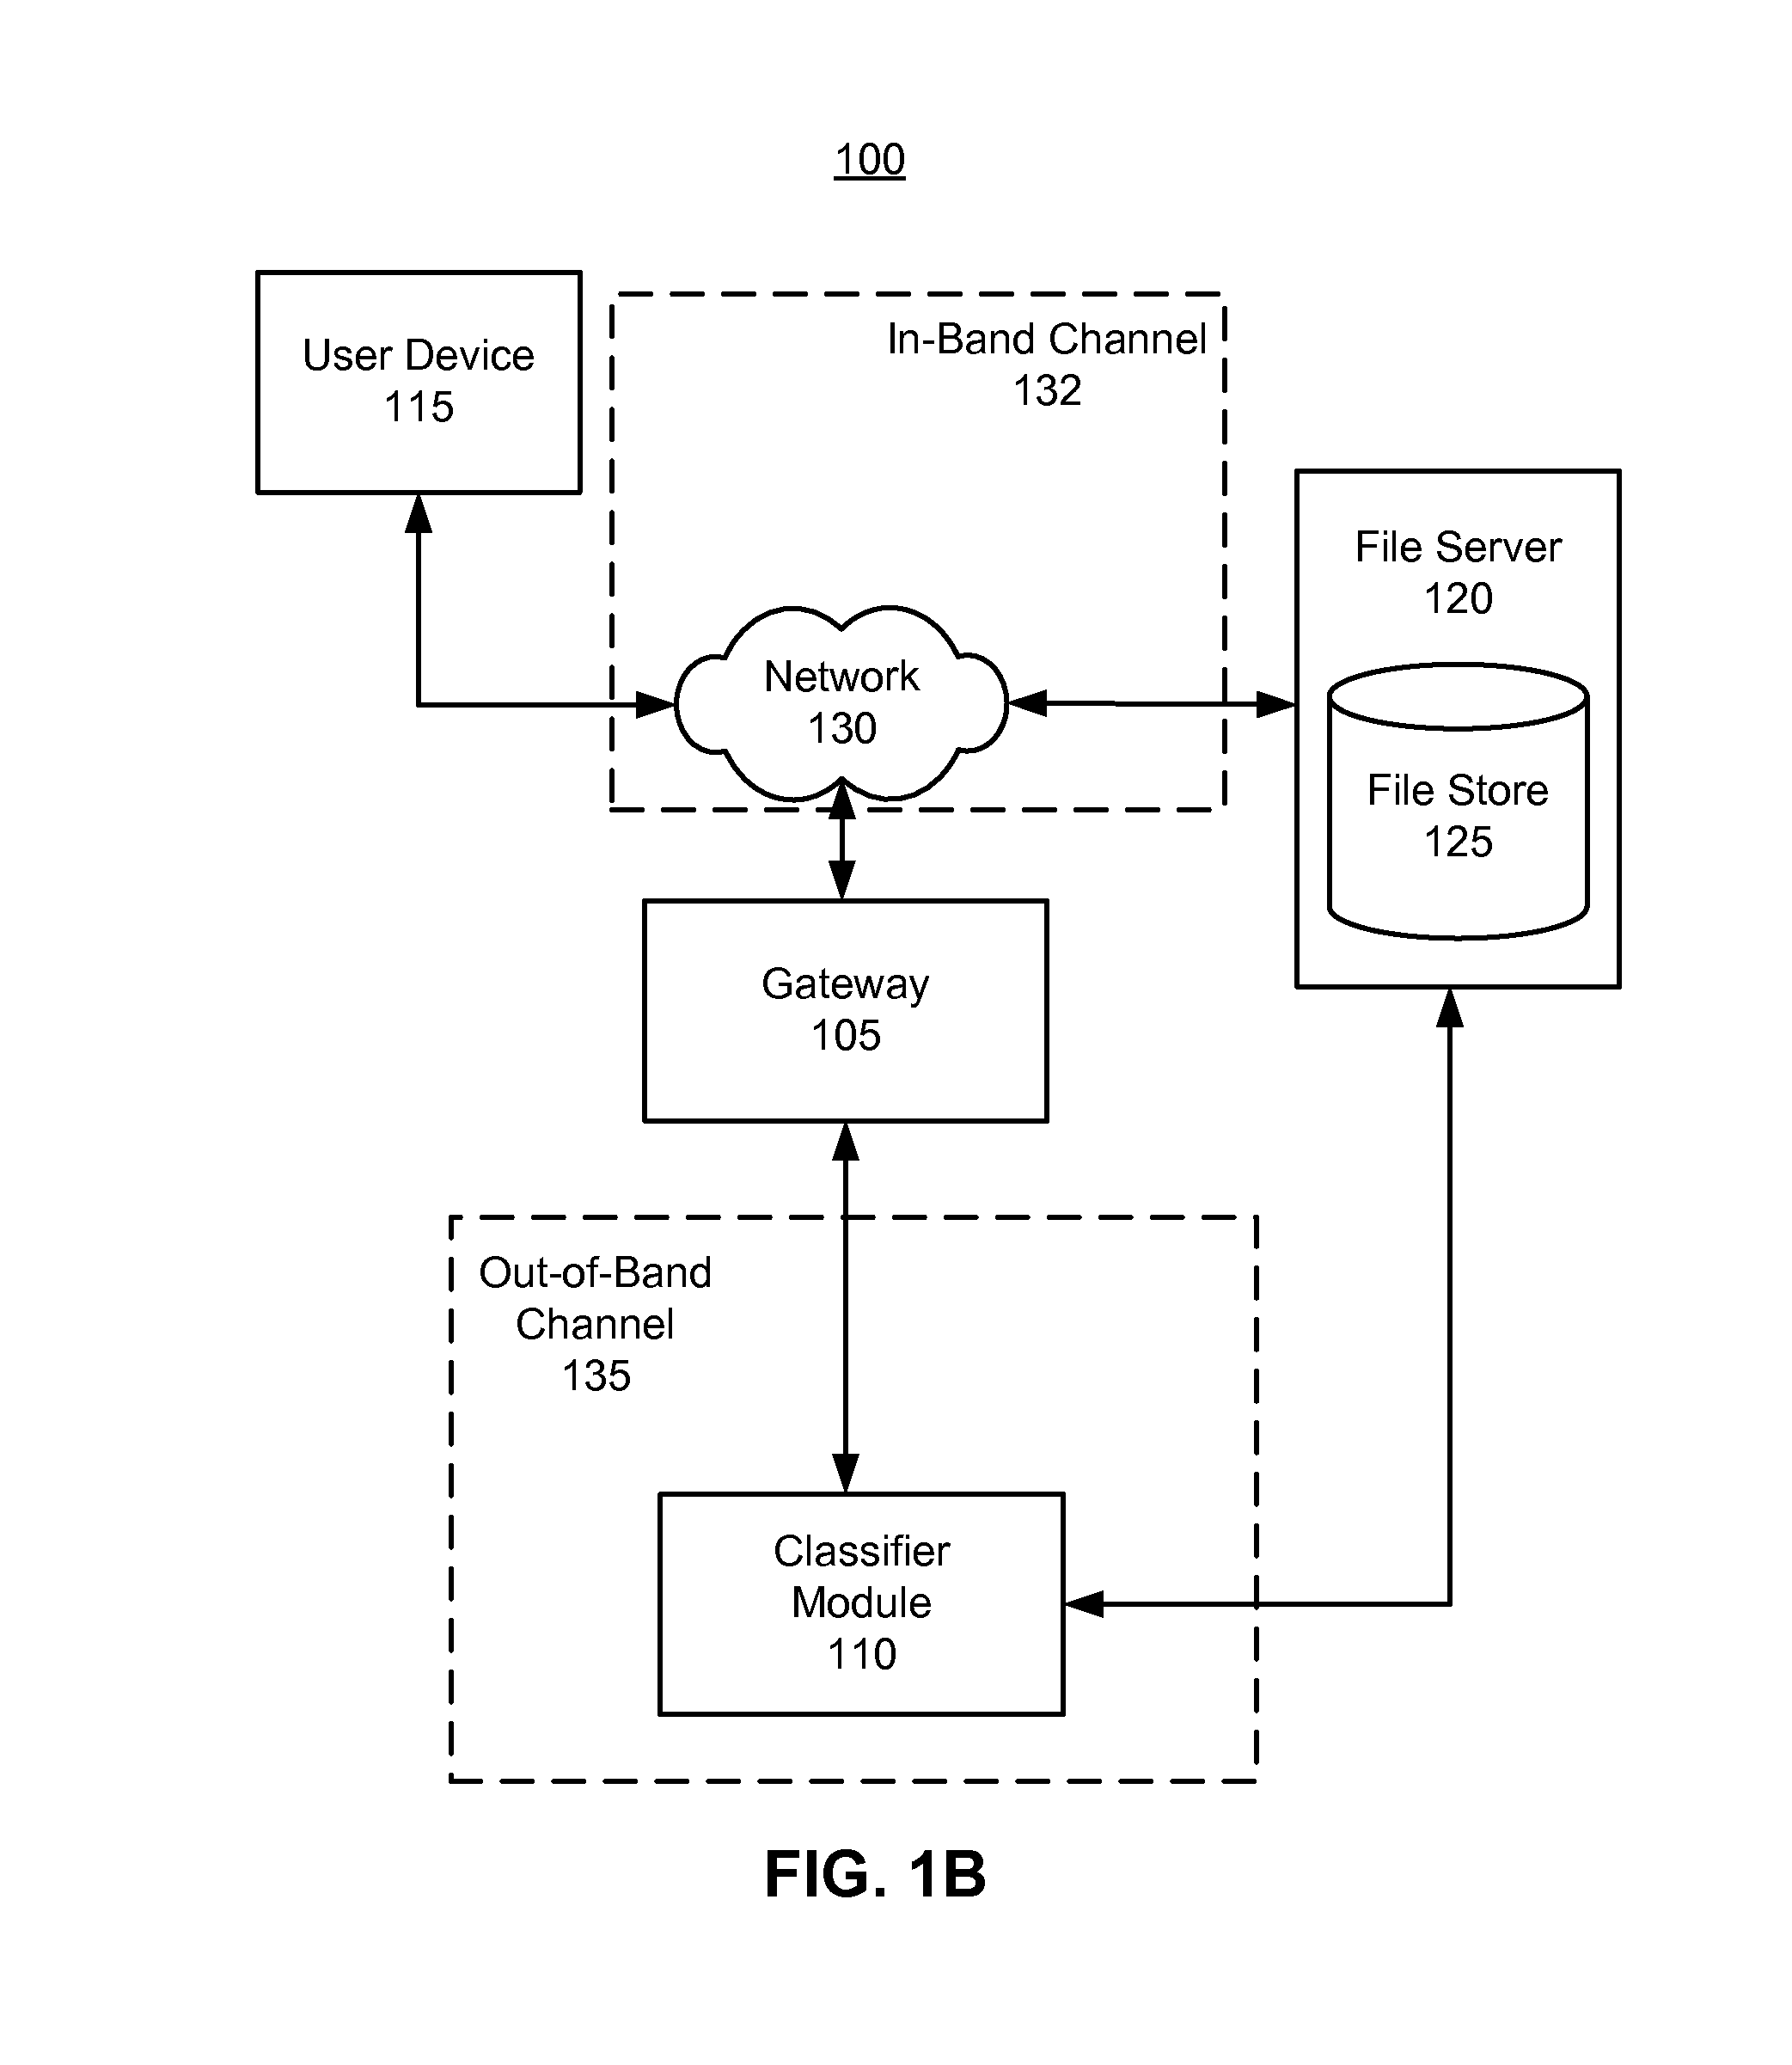 On-demand content classification using an out-of-band communications channel for facilitating file activity monitoring and control